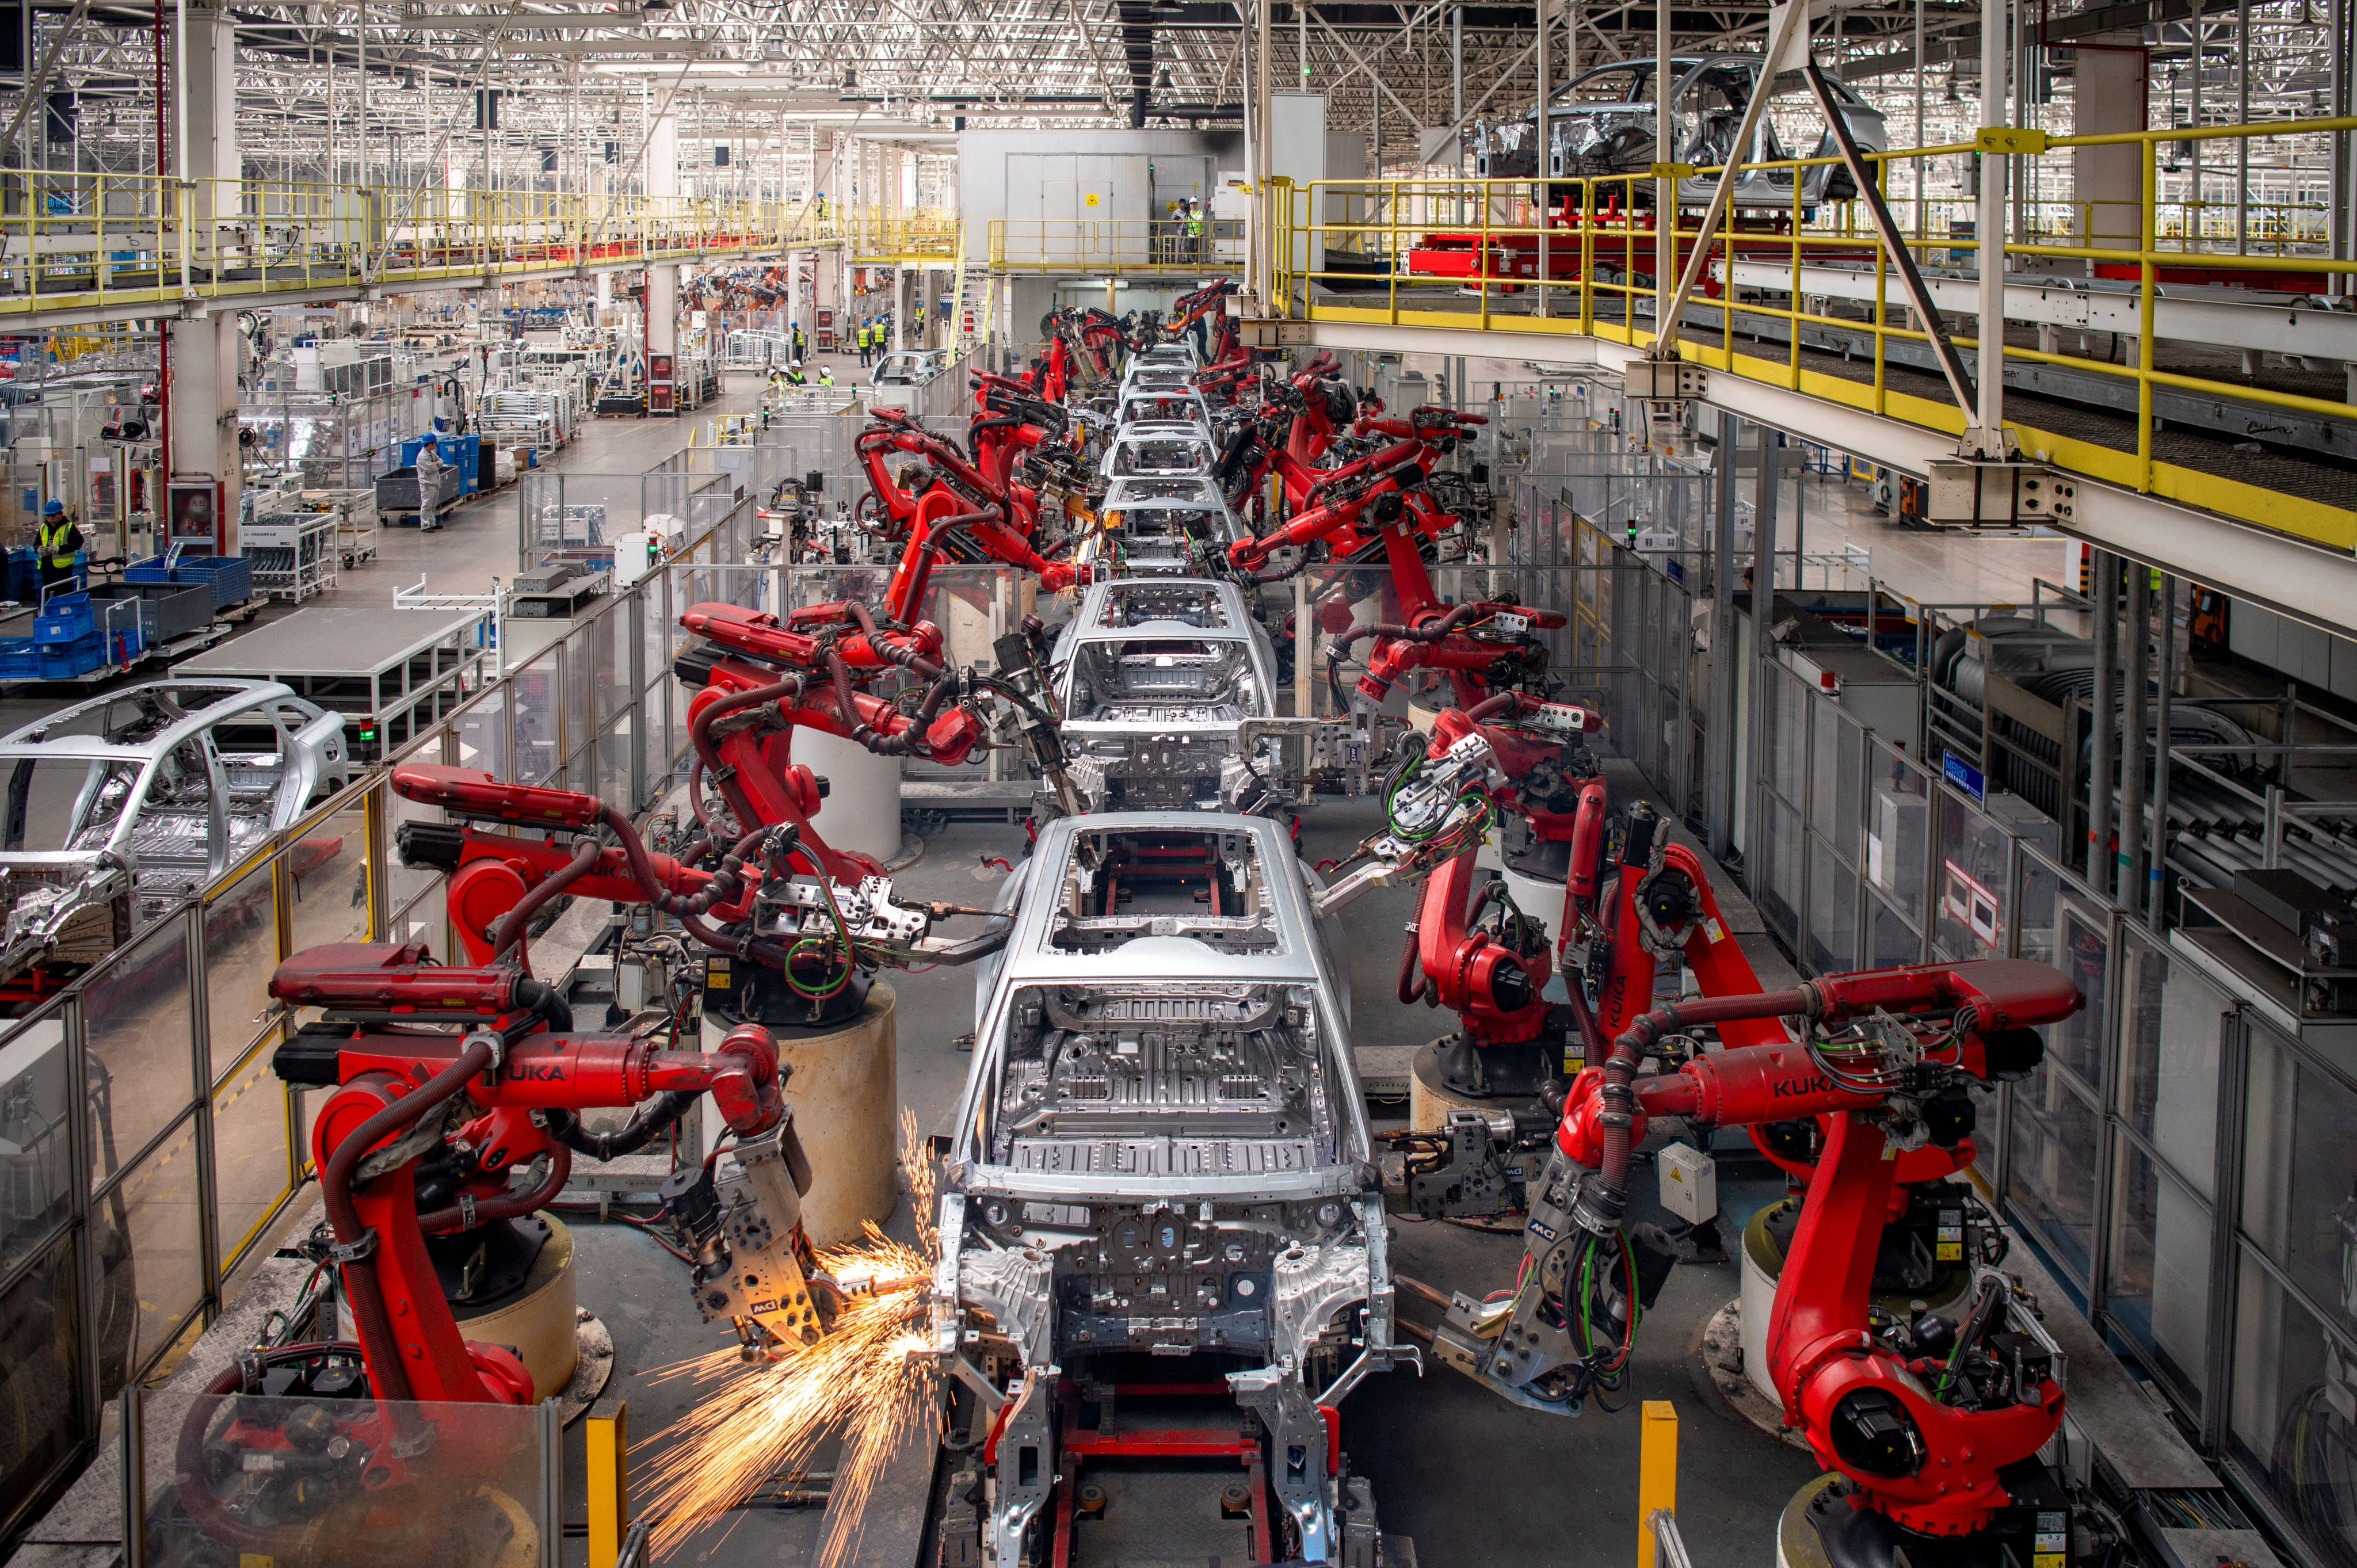 Robotic arms assemble electric cars at Leapmotor’s plant in Jinhua, Zhejiang province. Photo: China Daily via Reuters